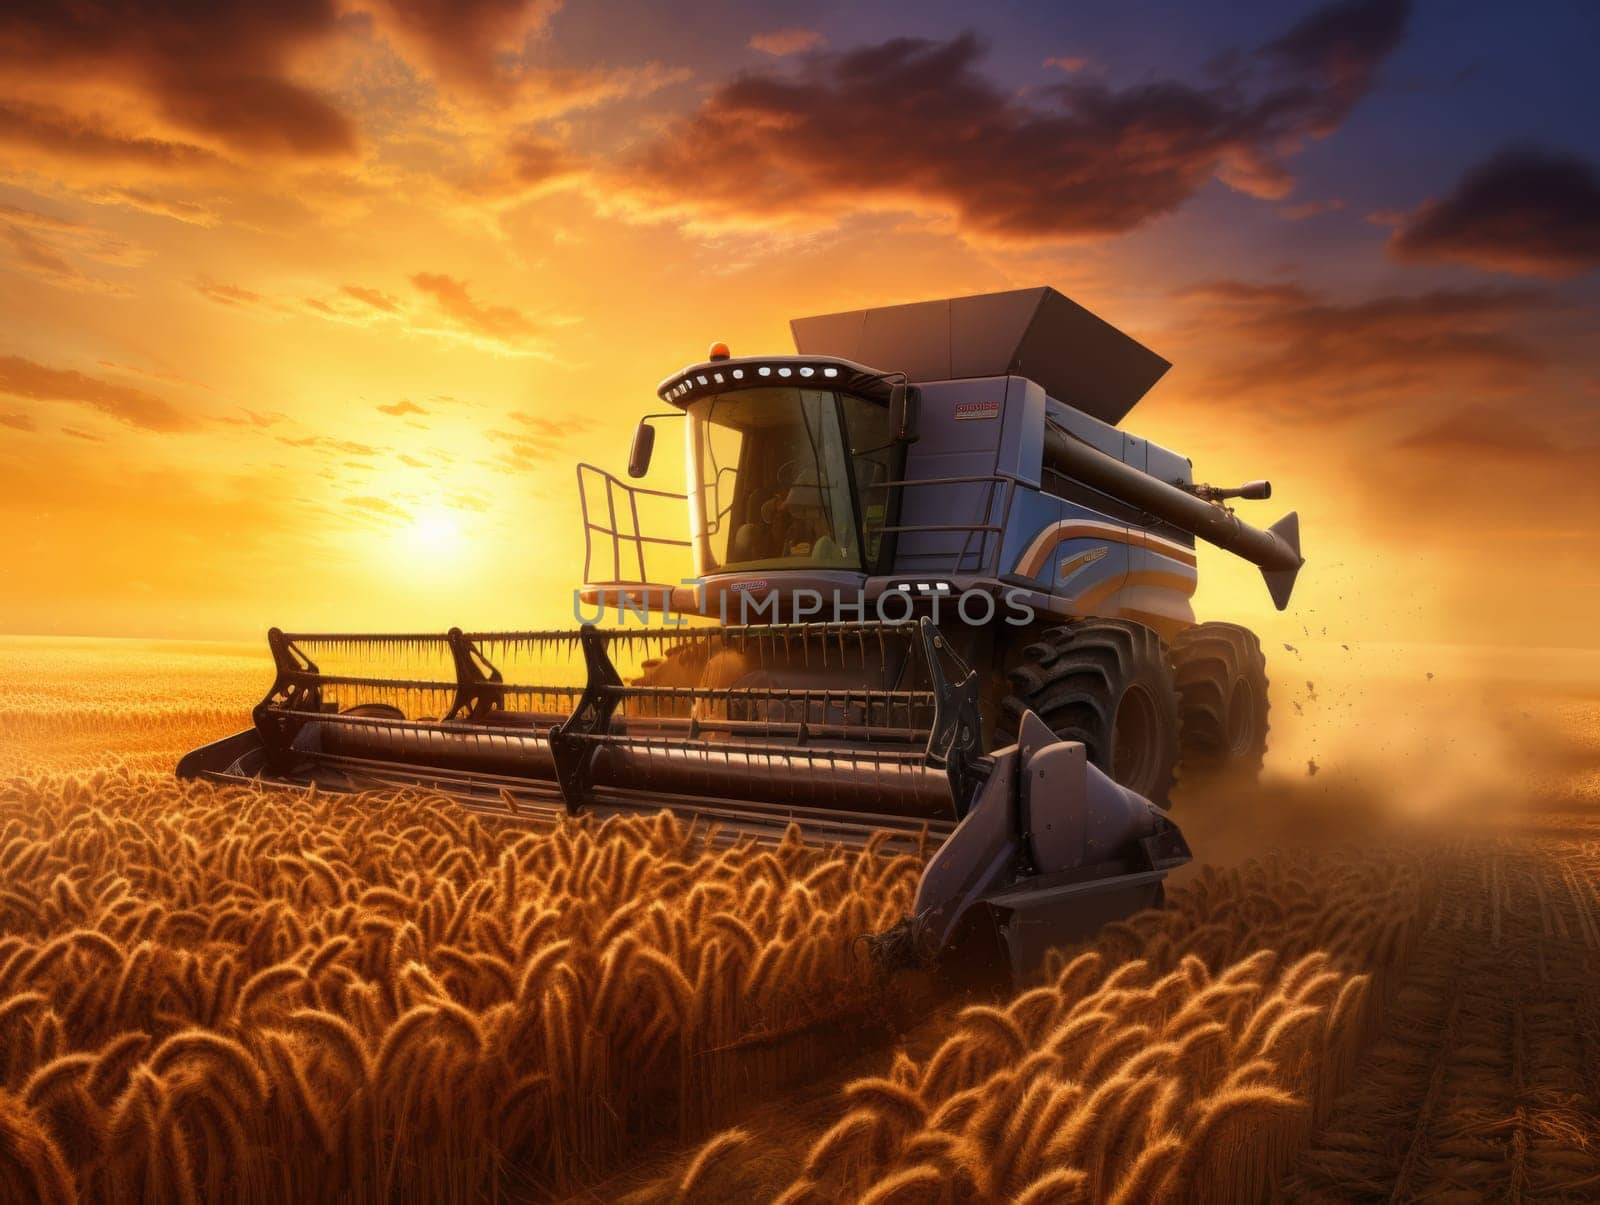 A combine machine cuts and gathers wheat crops during sunset, creating a striking silhouette against the golden sky.